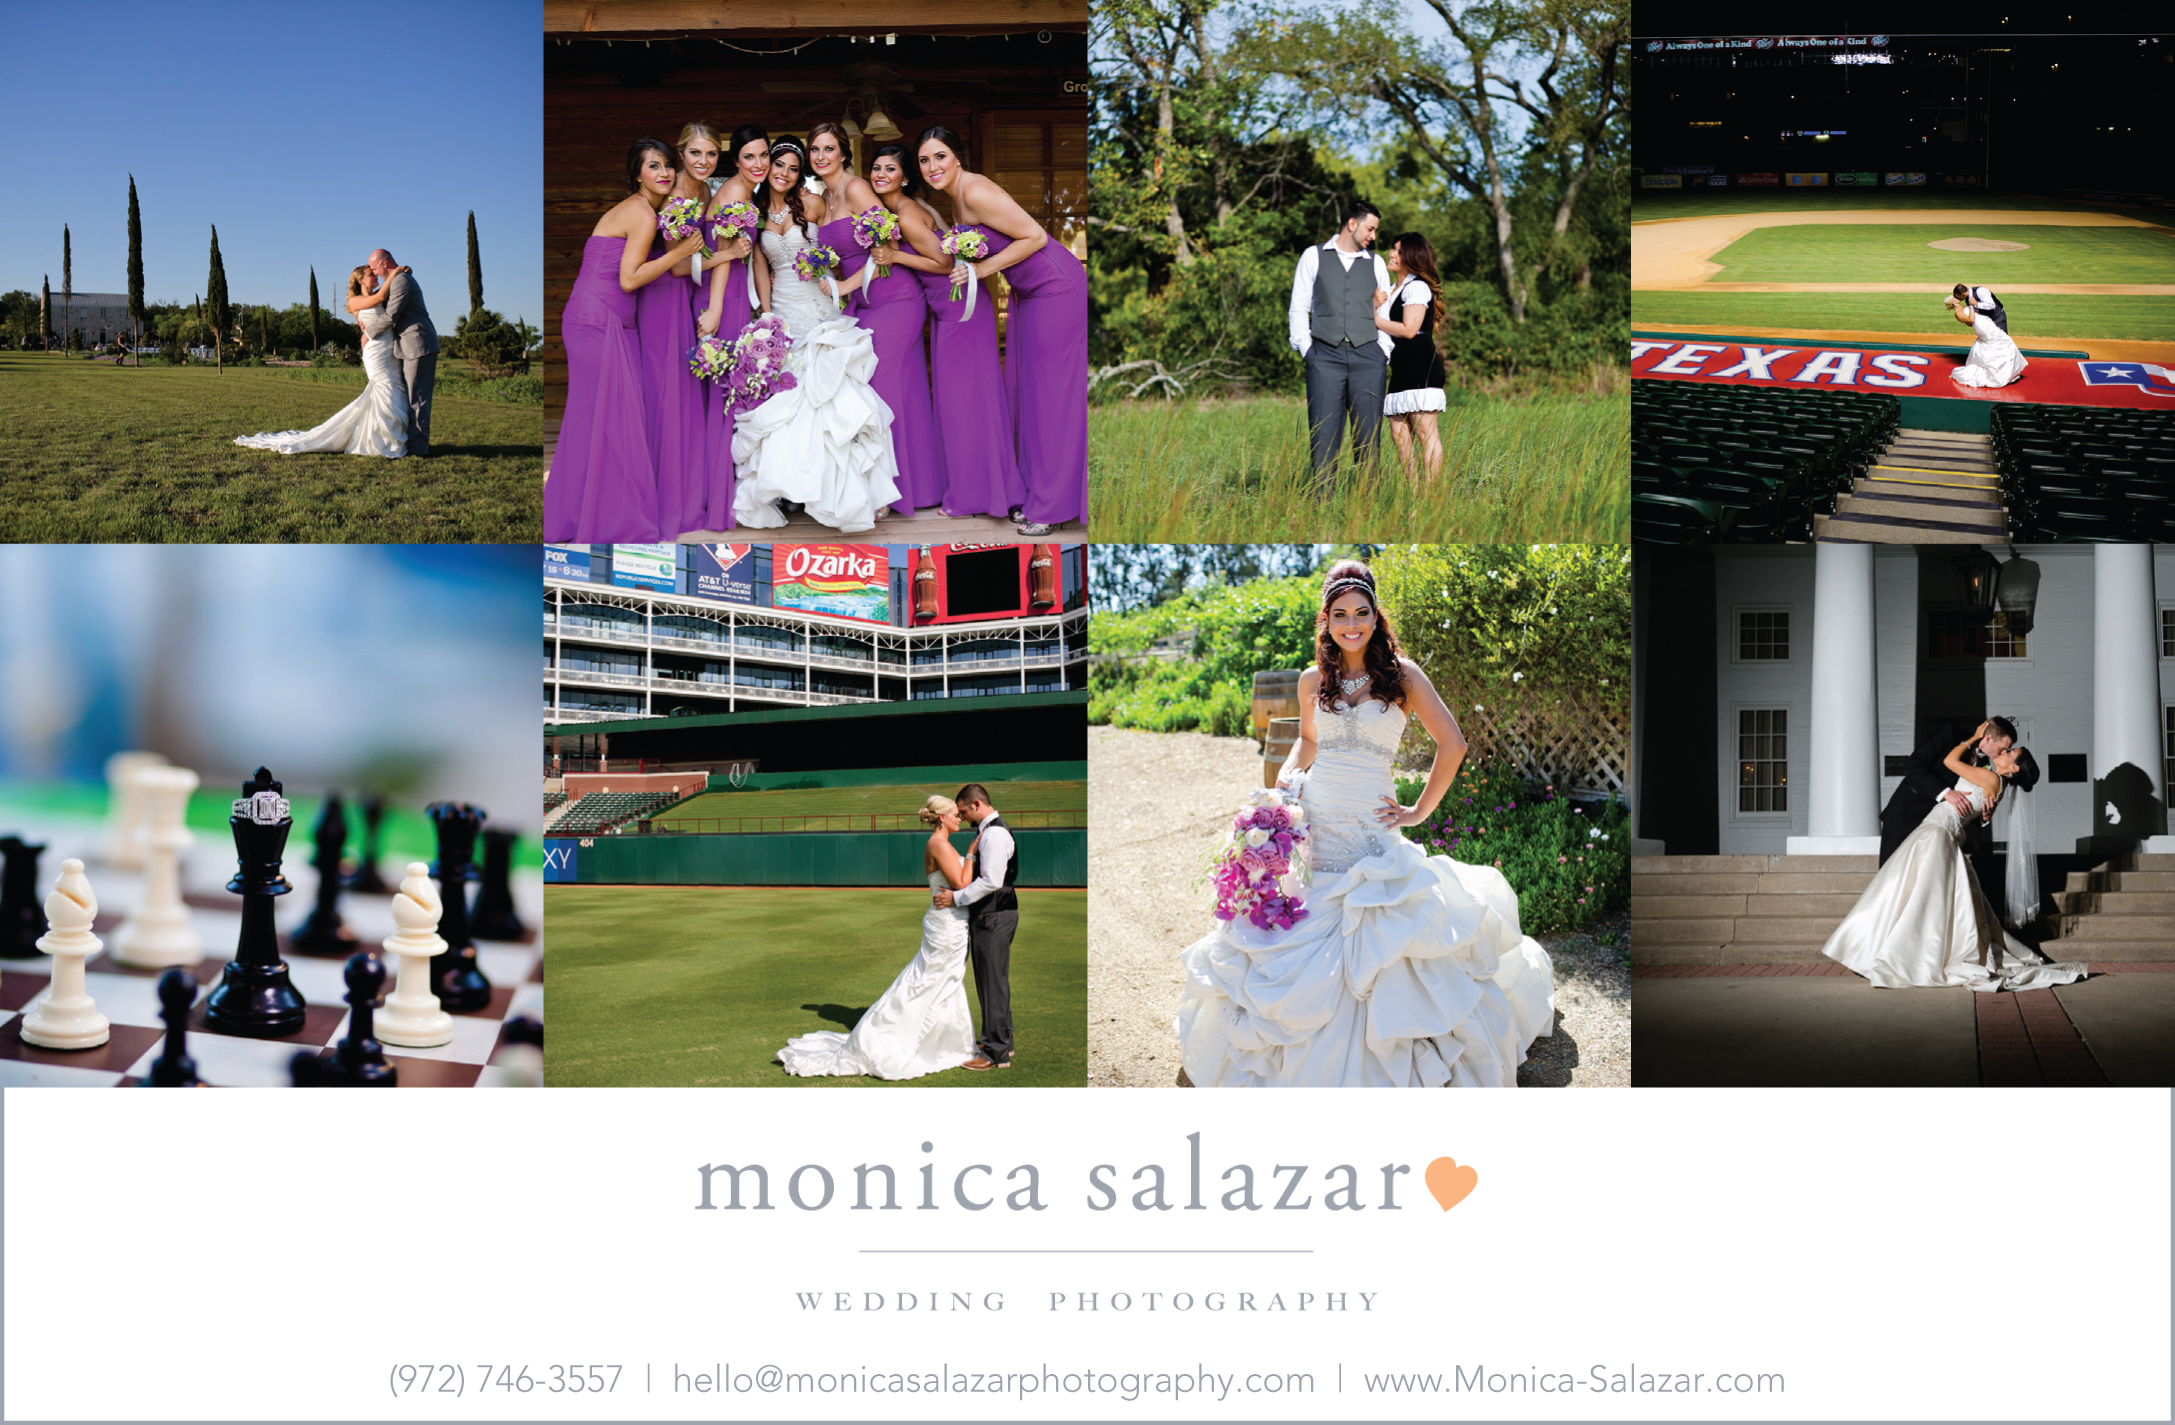 Summer Sale: All Wedding Photography Packages are 10% Off!